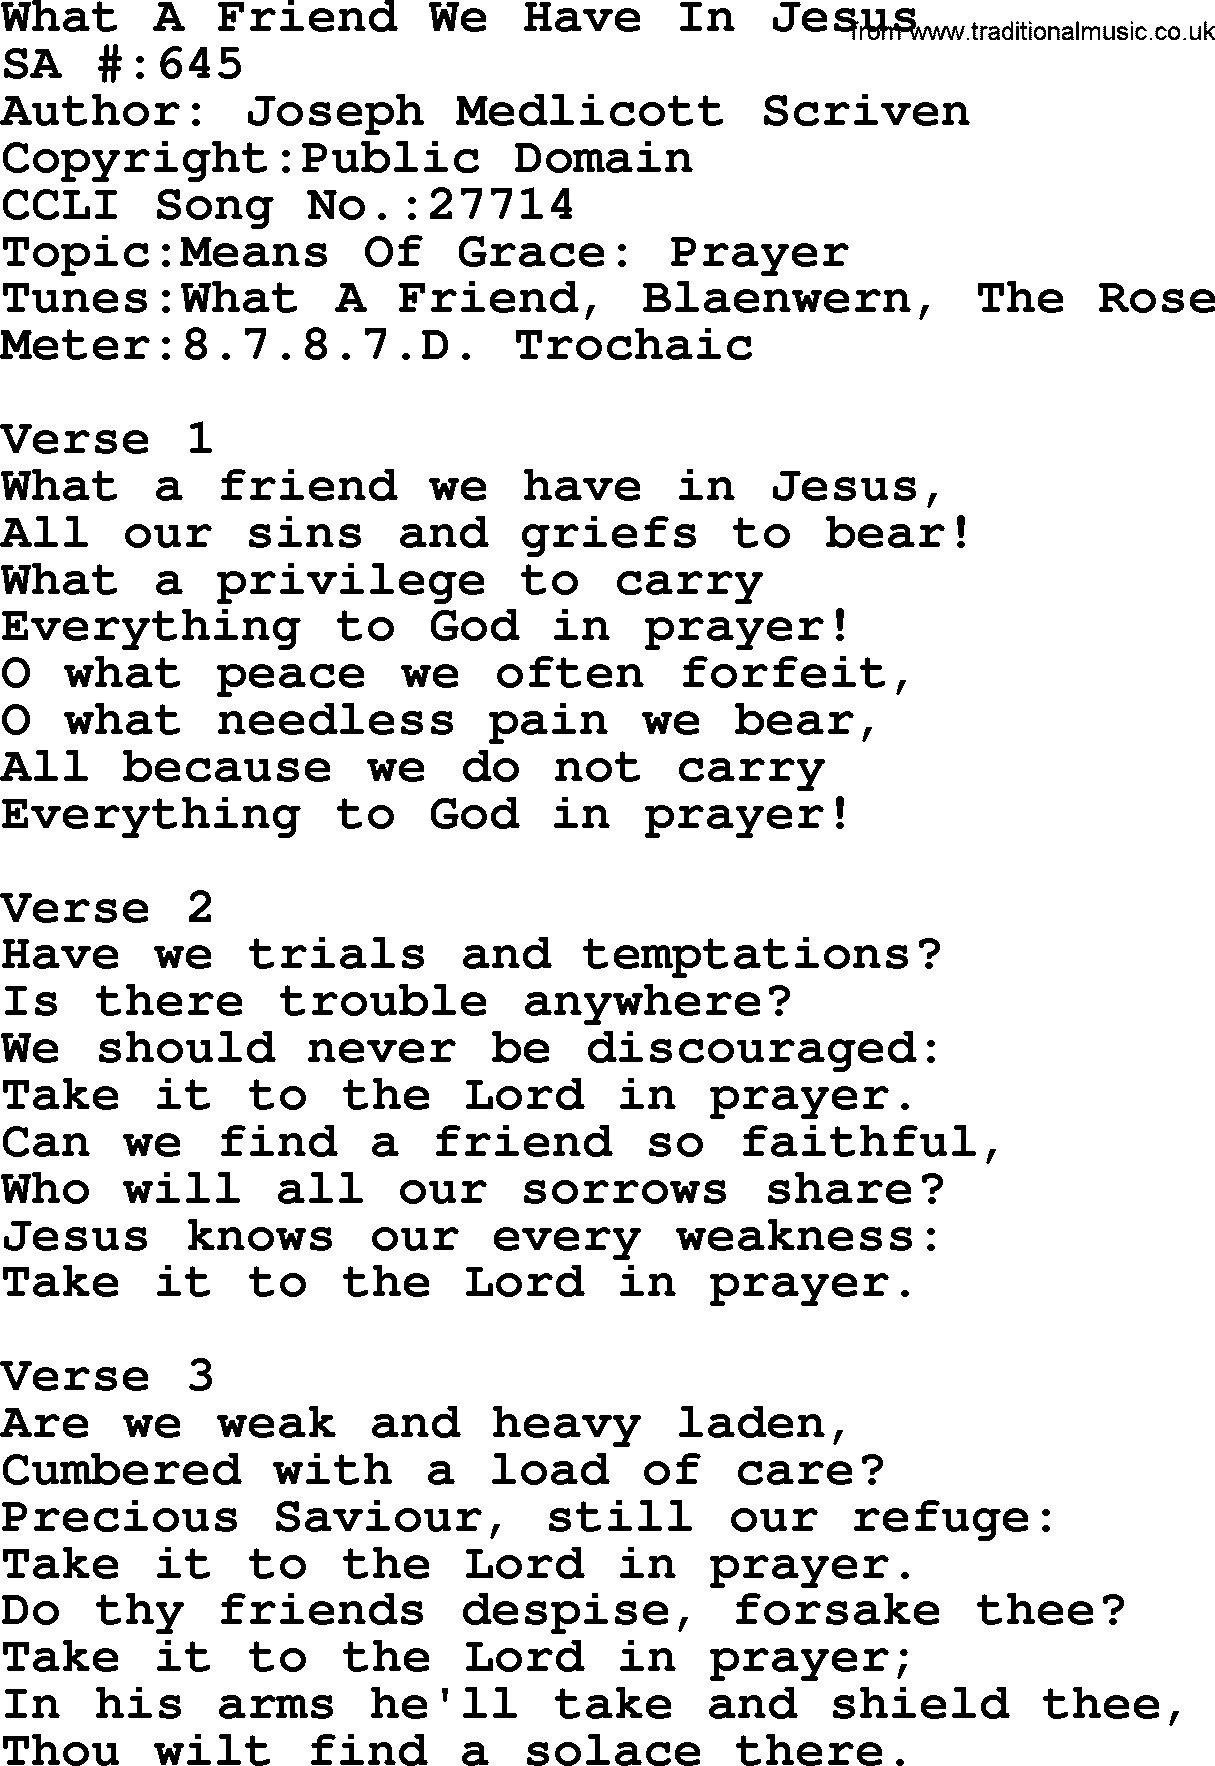 Salvation Army Hymnal, title: What A Friend We Have In Jesus, with lyrics and PDF,